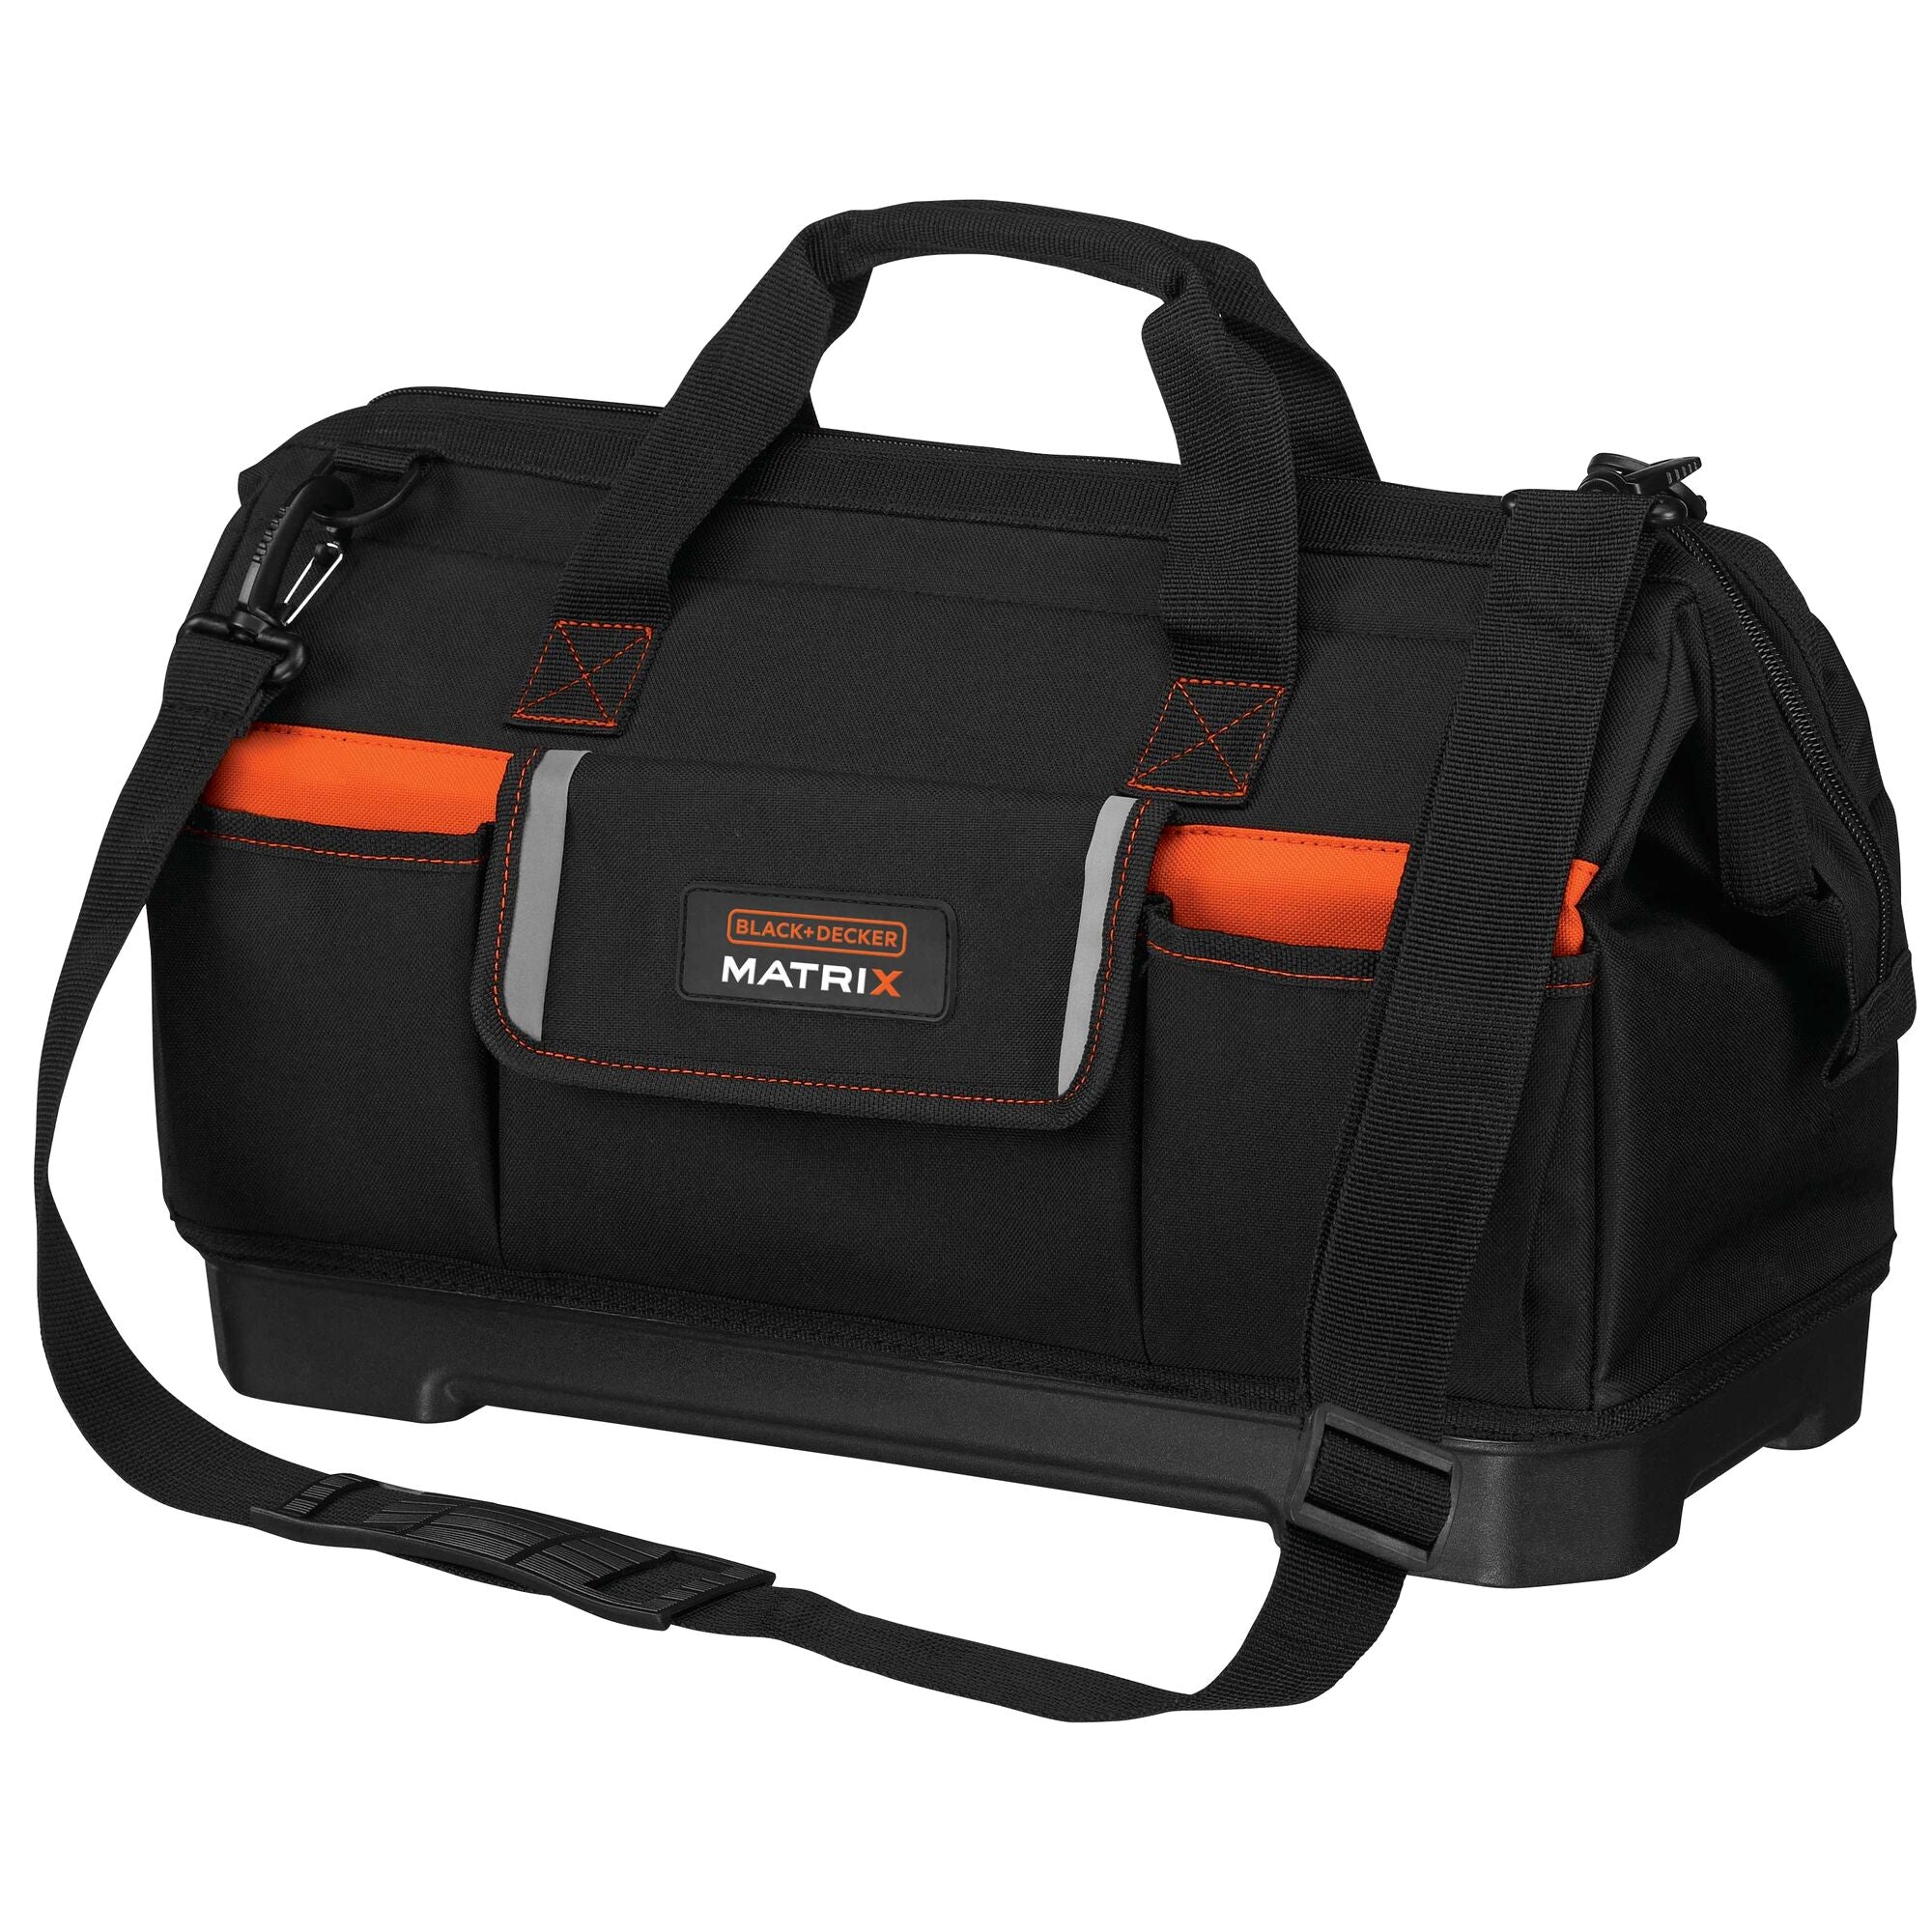 BLACK+DECKER Matrix Impact Driver Attachment with 16 in. Wide Mouth  Zippered Tool Bag (BDCMTI & BDST500002APB)